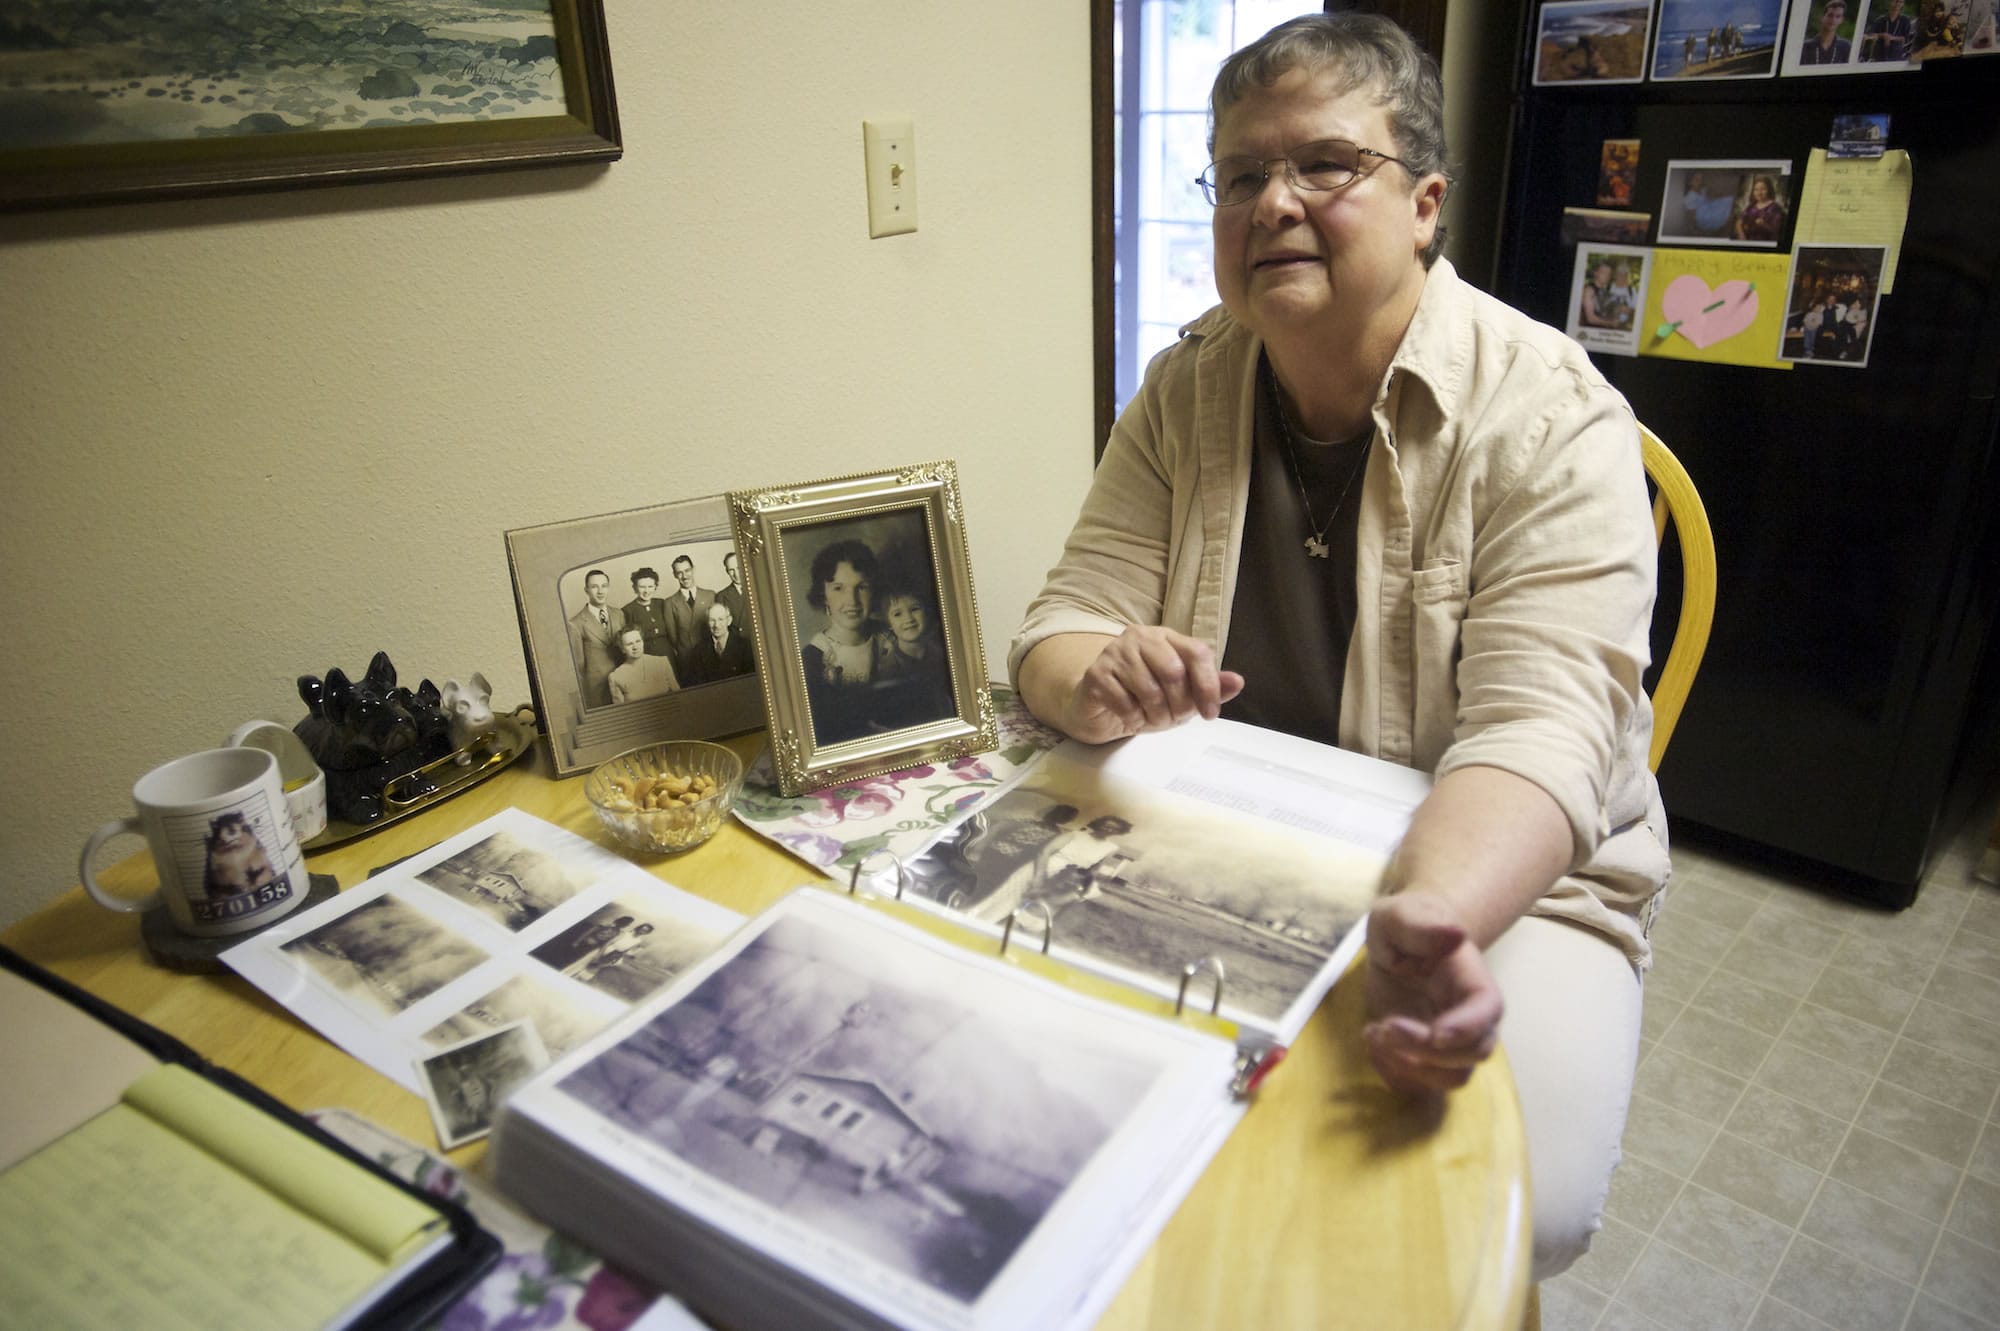 In Paquita and Jim Rupp's Cascade Park home, she talks about her family's experiences during the Dust Bowl in the 1930s.